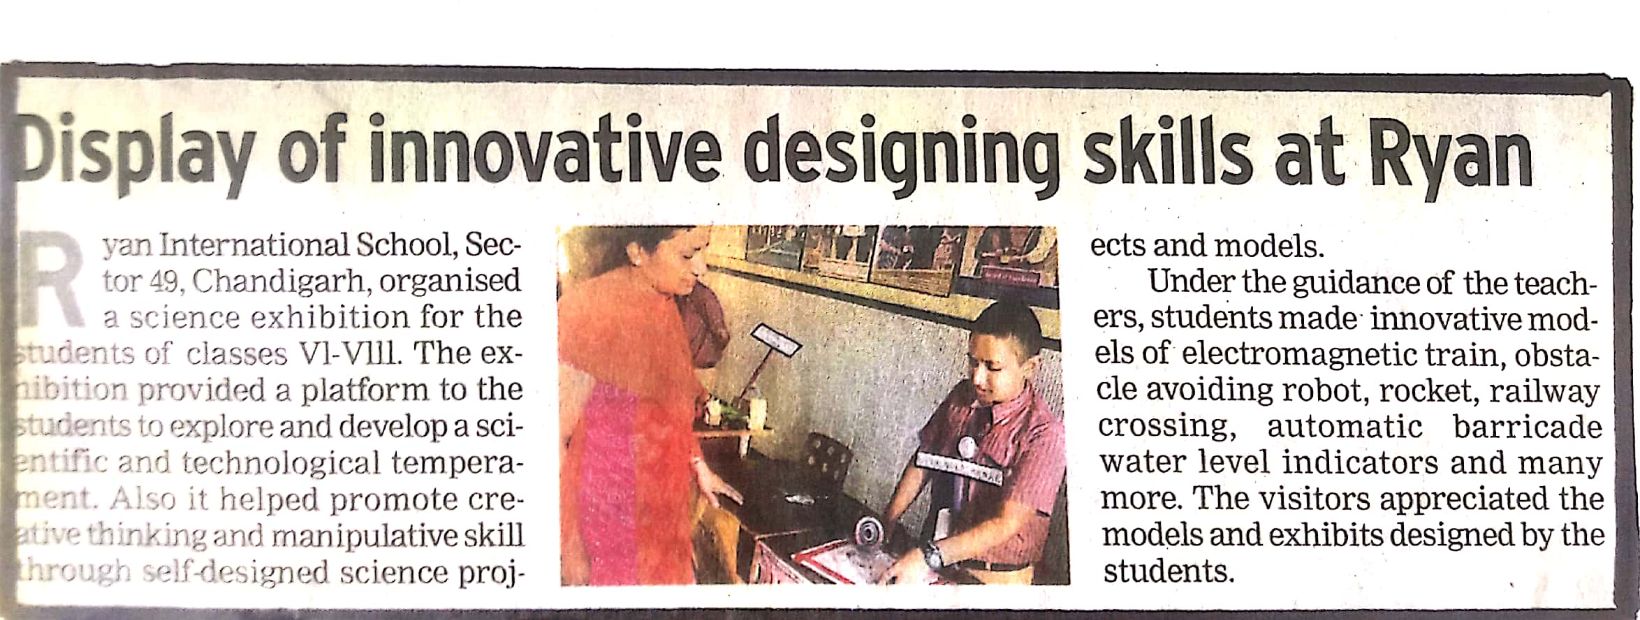 Science Exhibition was featured in The Tribune